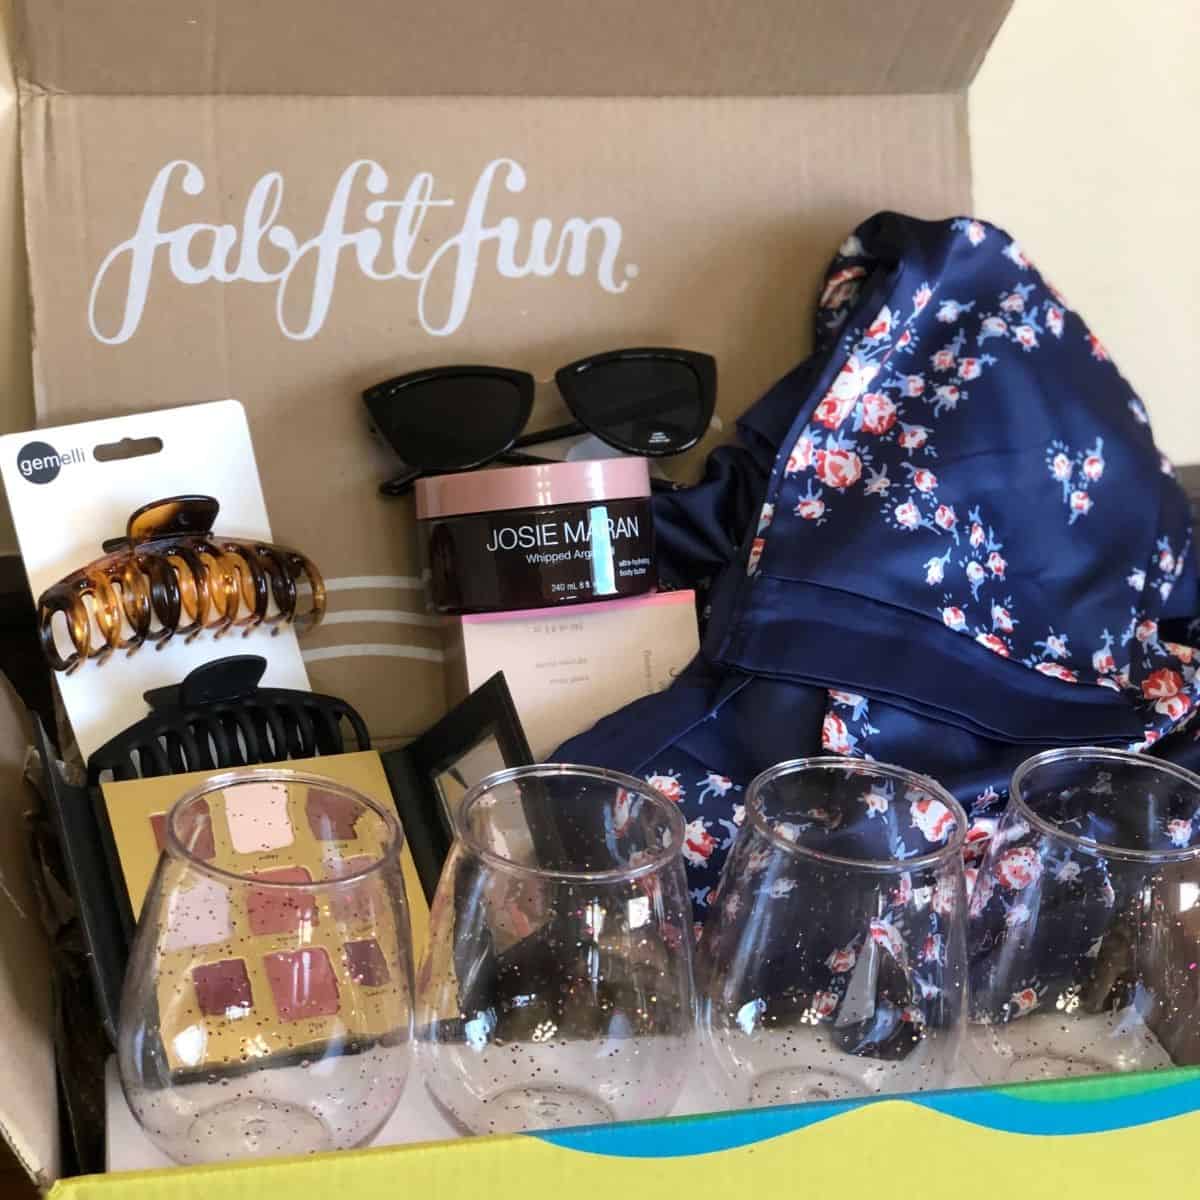 spring fab fit fun box with lotion a robe sunglasses drinkware, hair clips, and eyeshadow palette